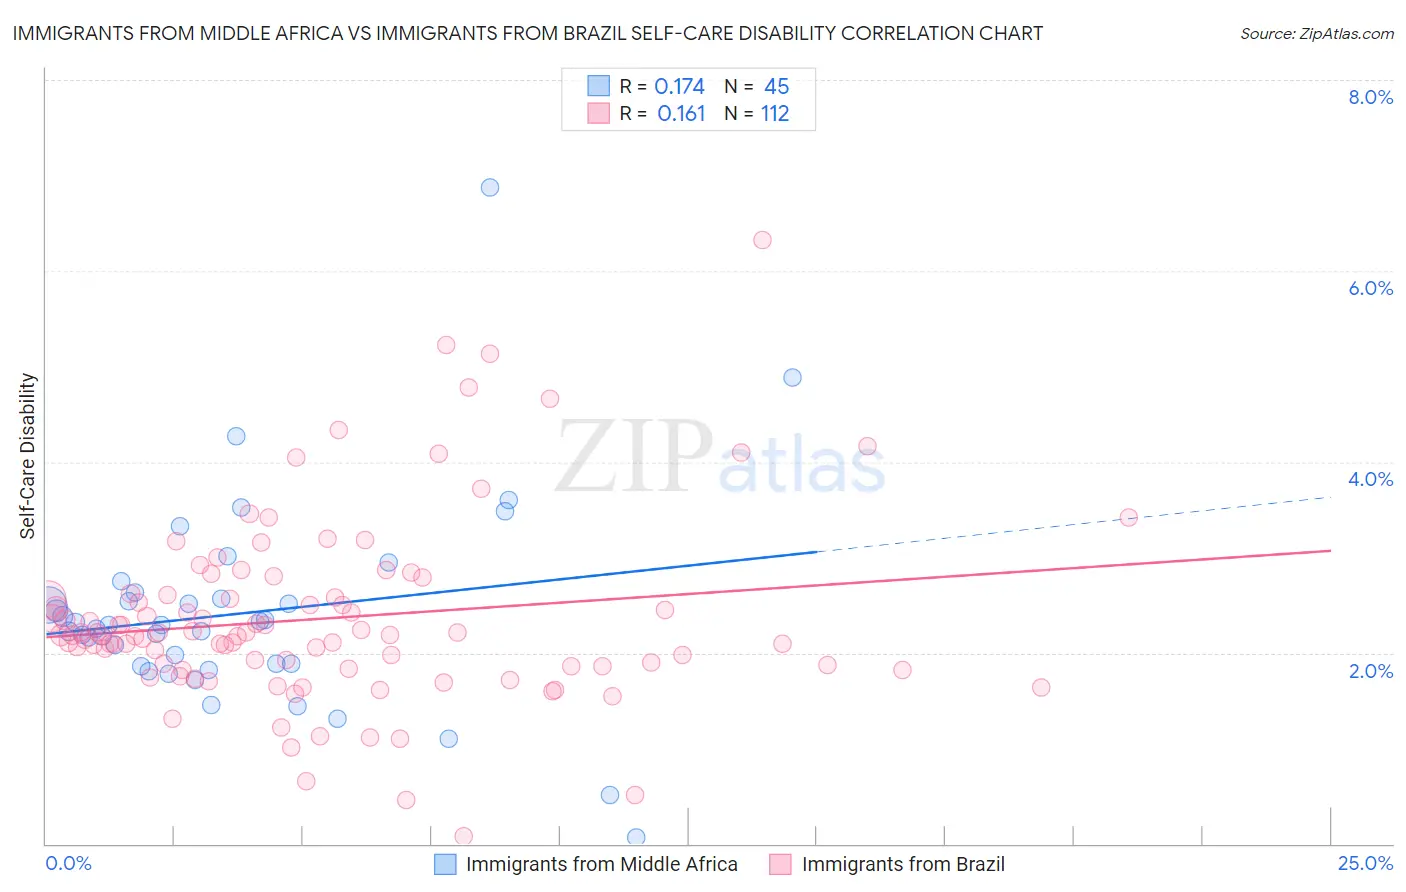 Immigrants from Middle Africa vs Immigrants from Brazil Self-Care Disability